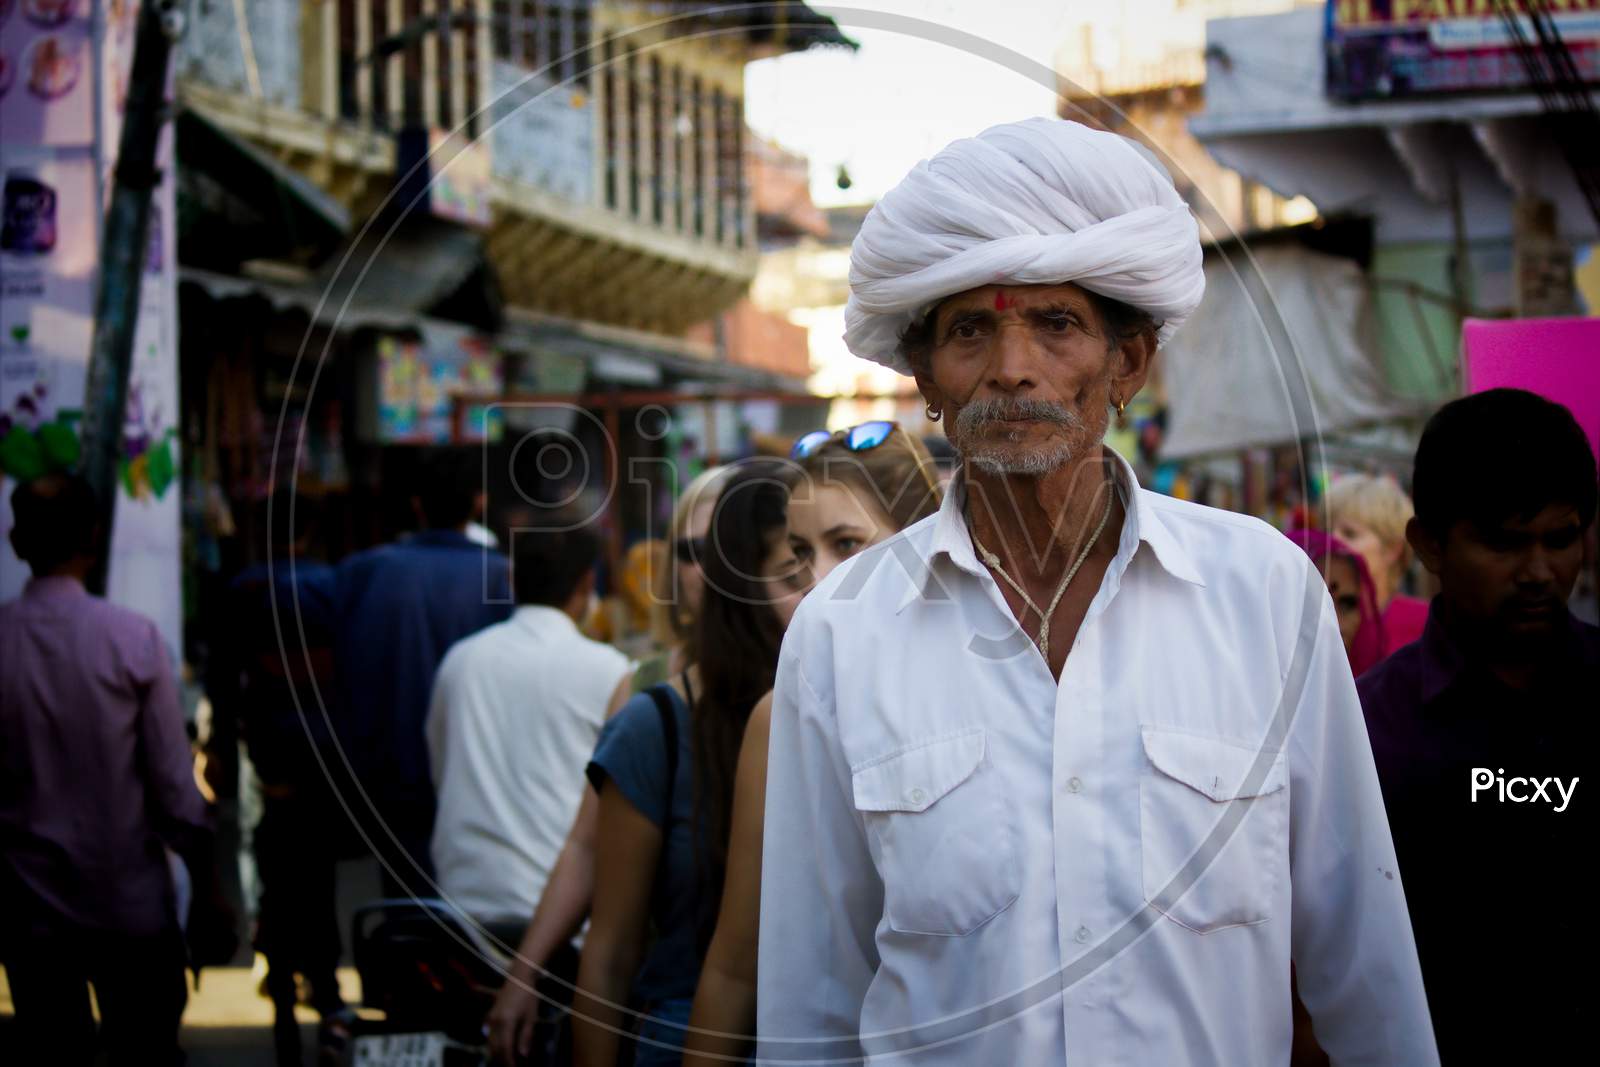 Pushkar, India - November 10, 2016: An Old Rajasthani Man In Traditional Ethnic Wear Such As White Turban And Typical White Kurta Walking In A Street During Pushkar Fair In The State Of Rajasthan